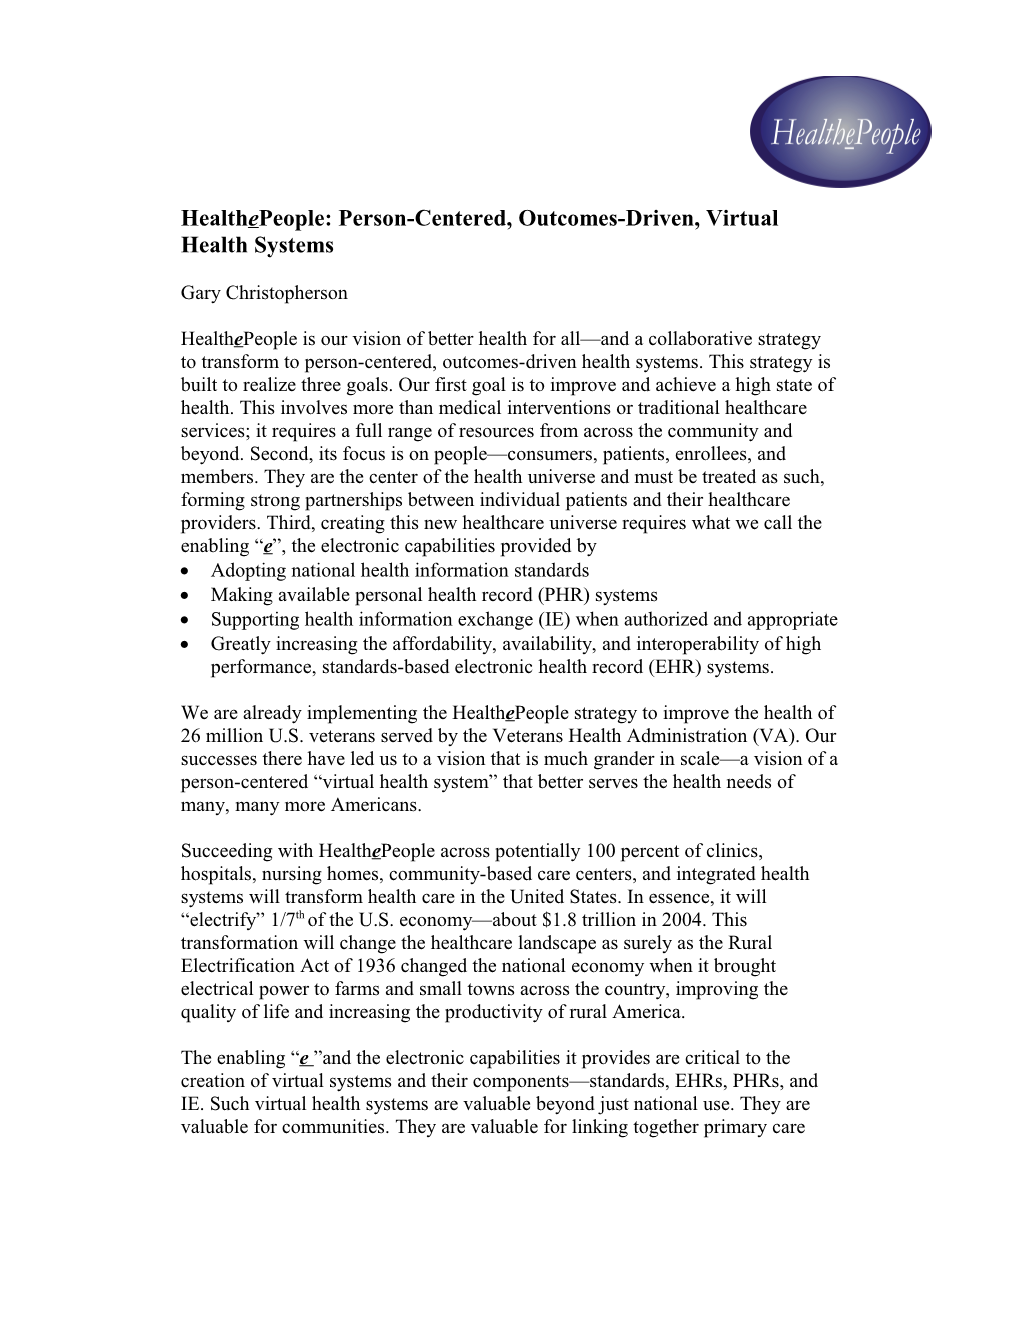 Healthepeople: Person-Centered, Outcomes-Driven, Virtual Health Systems